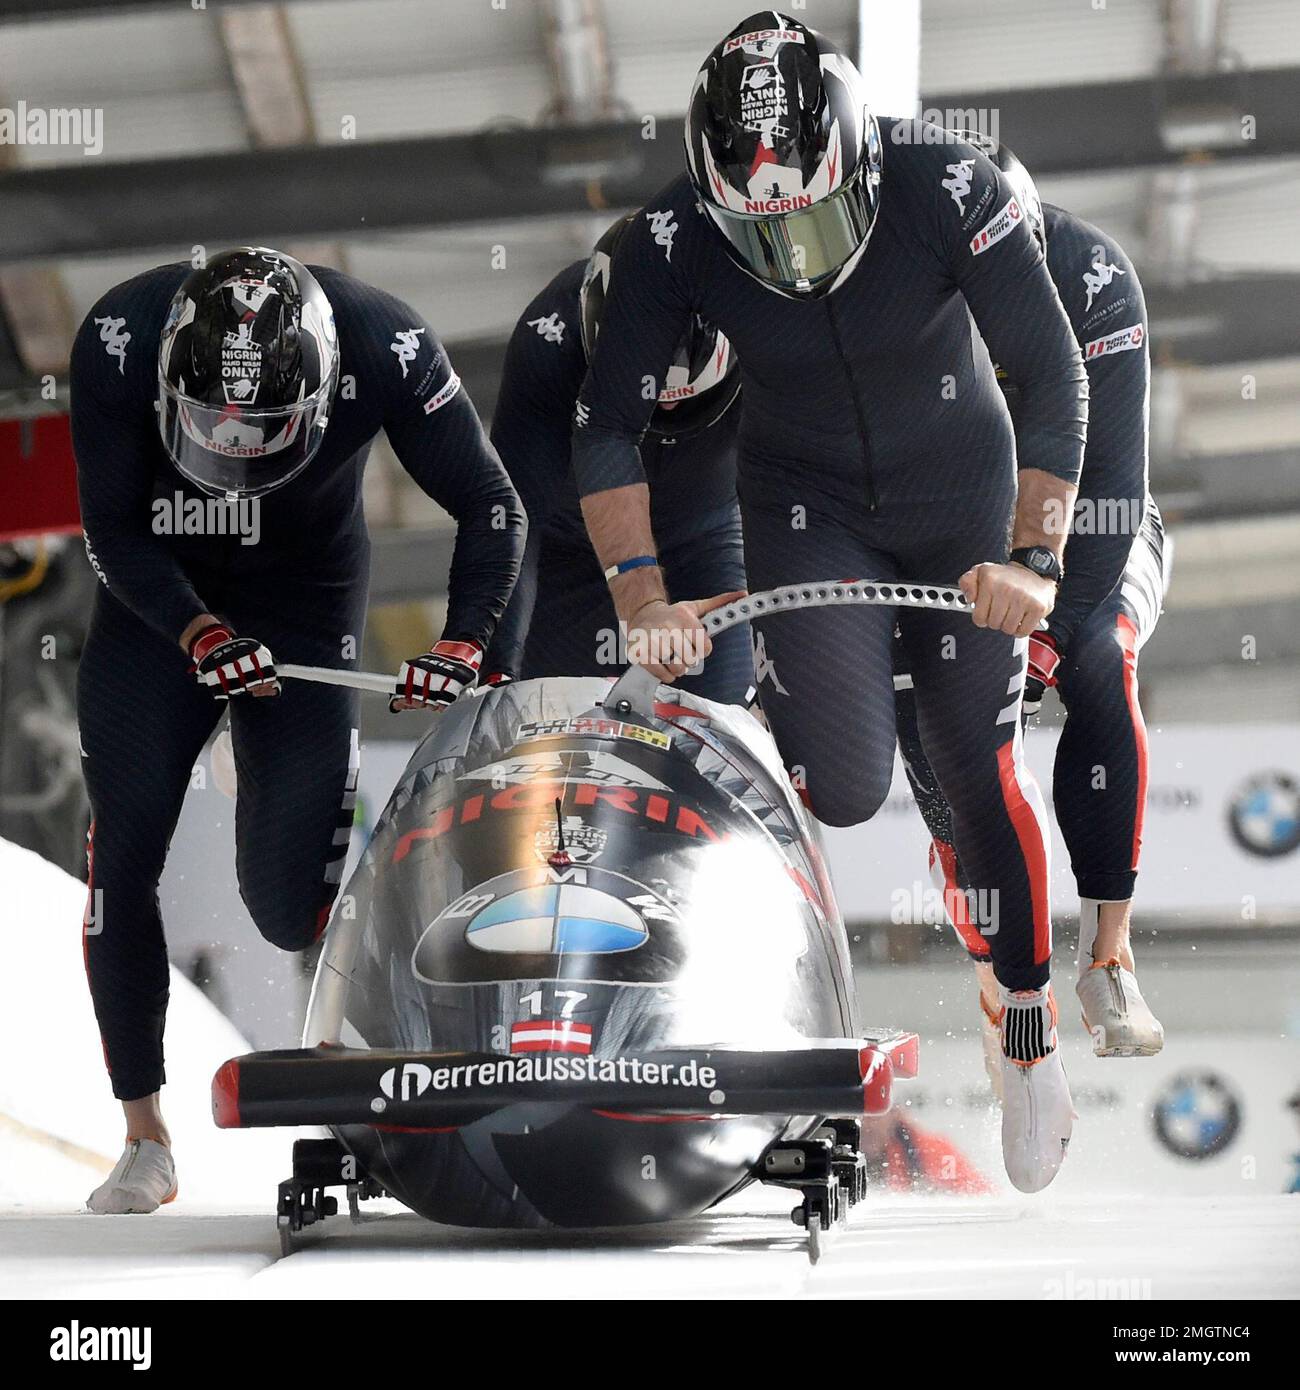 Team Benjamin Maier, Marco Rangl, Markus Sammer and Danut Ion Moldovan of Austria start during the four-man bobsled first race at the Bobsleigh and Skeleton World Championships in Altenberg, eastern Germany, Saturday,